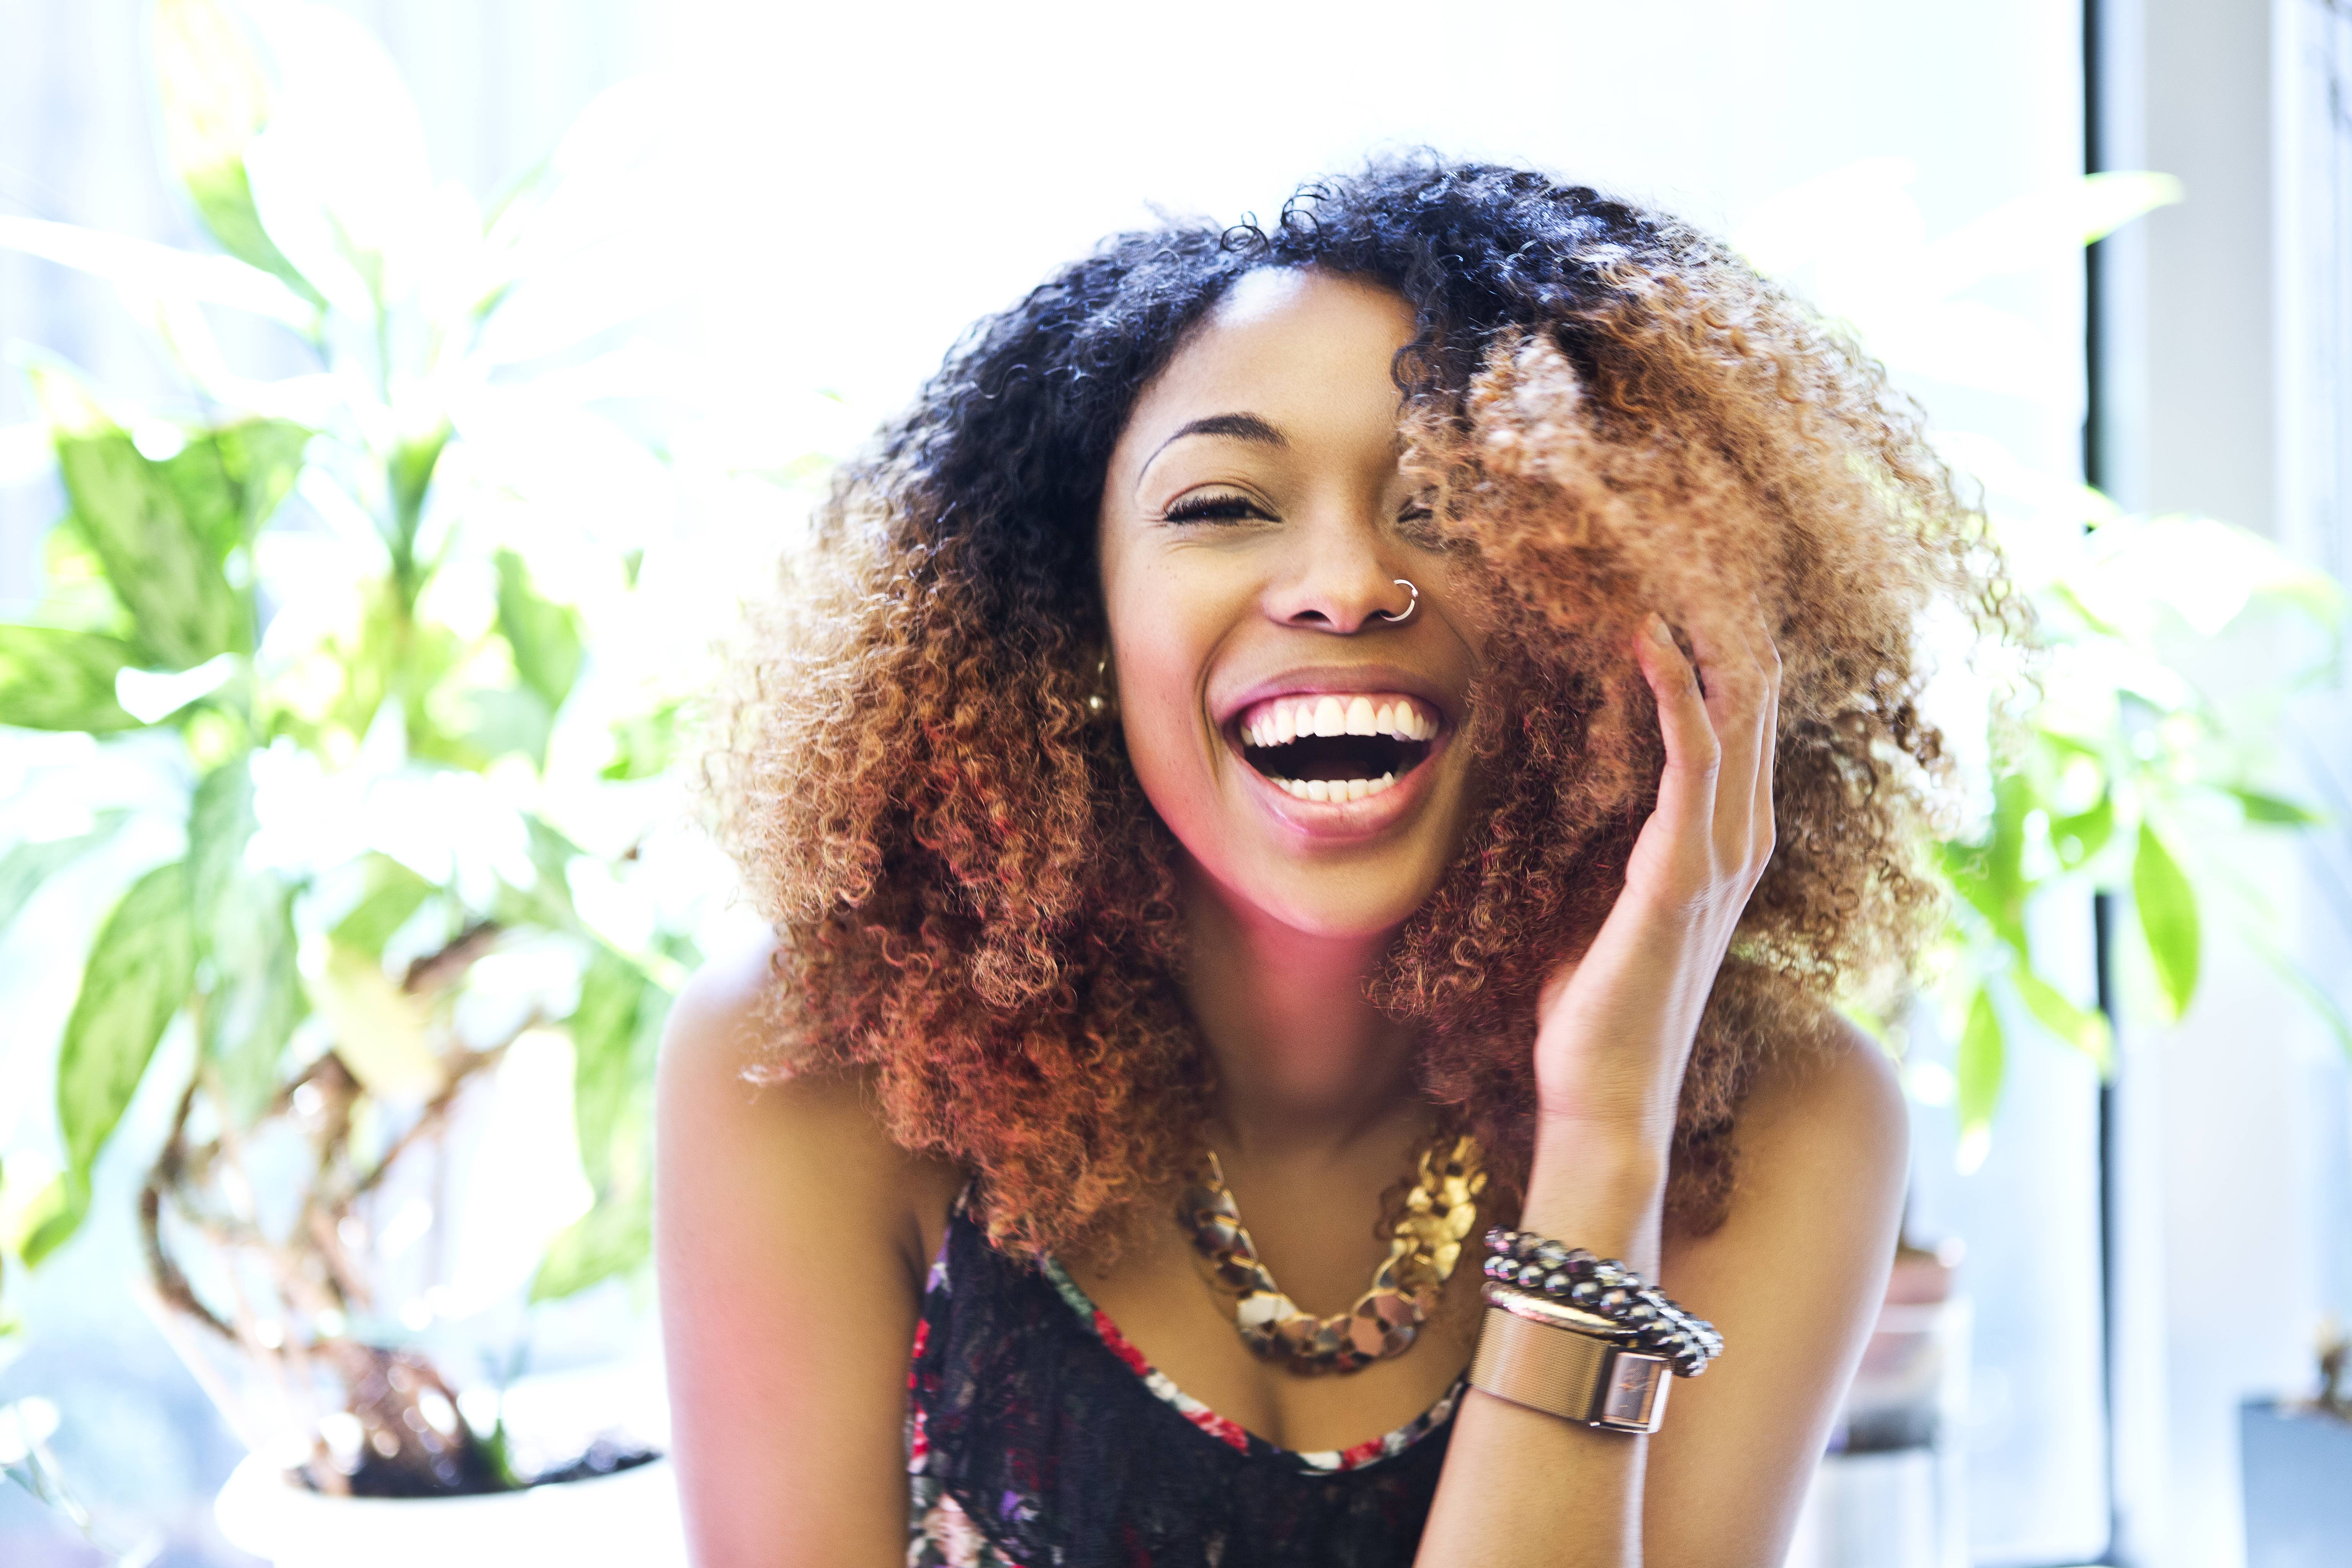 happy woman with curly hair smiling